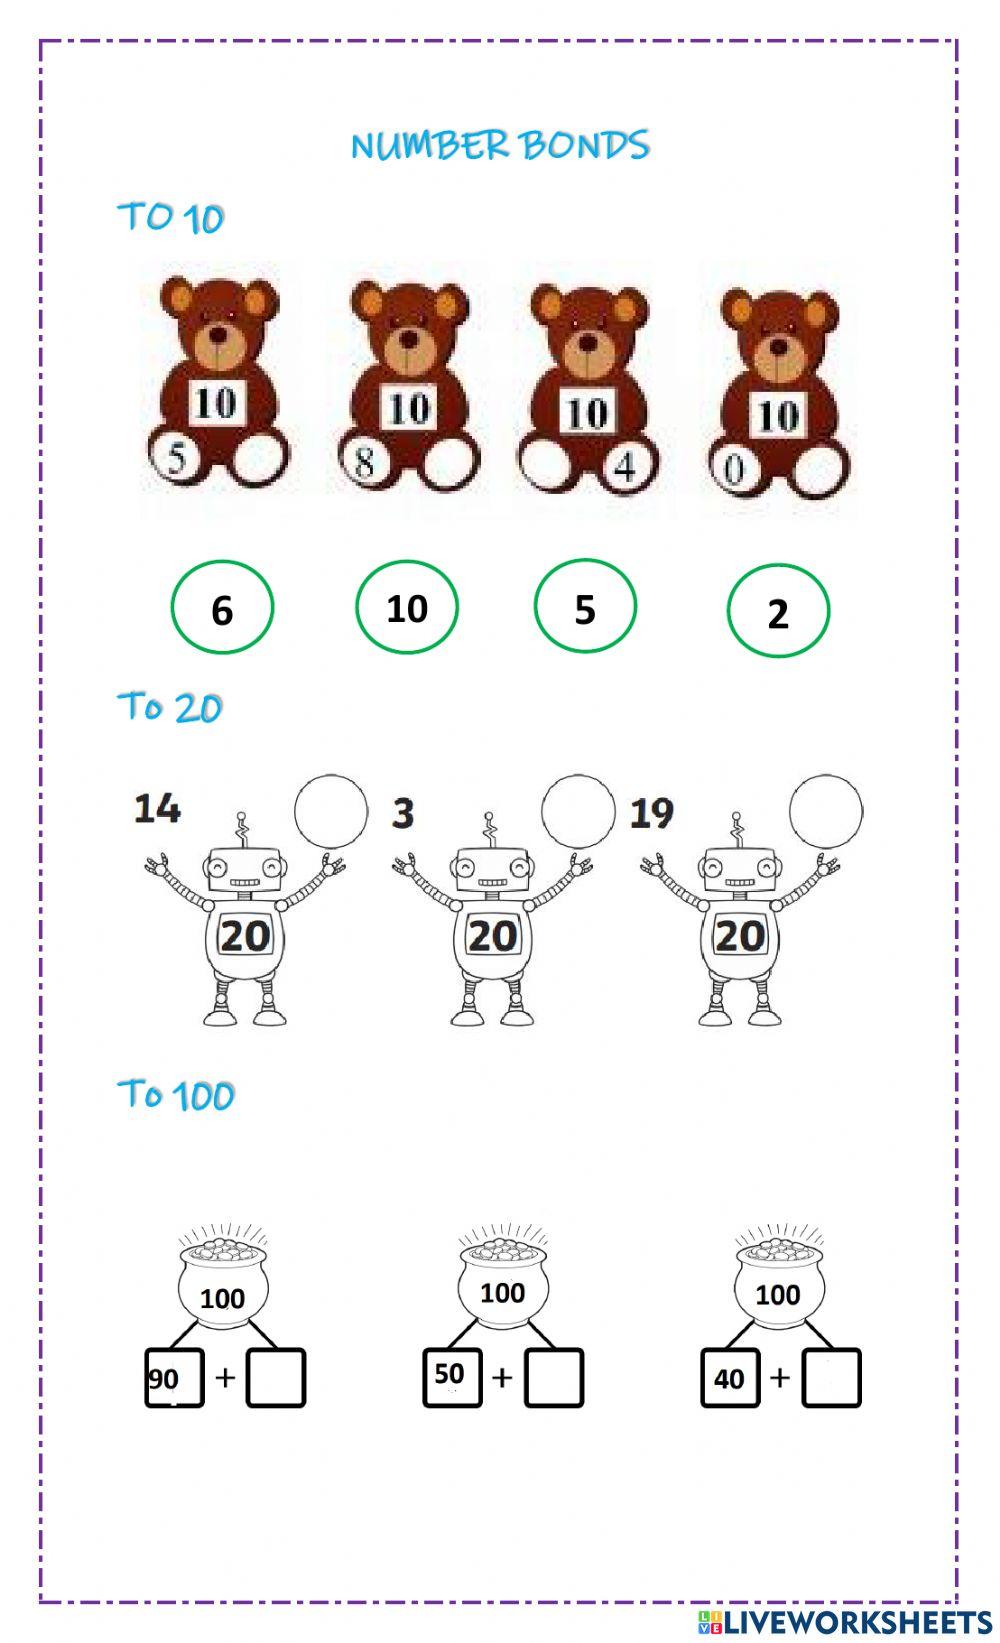 number bonds to 10, 20 and 100